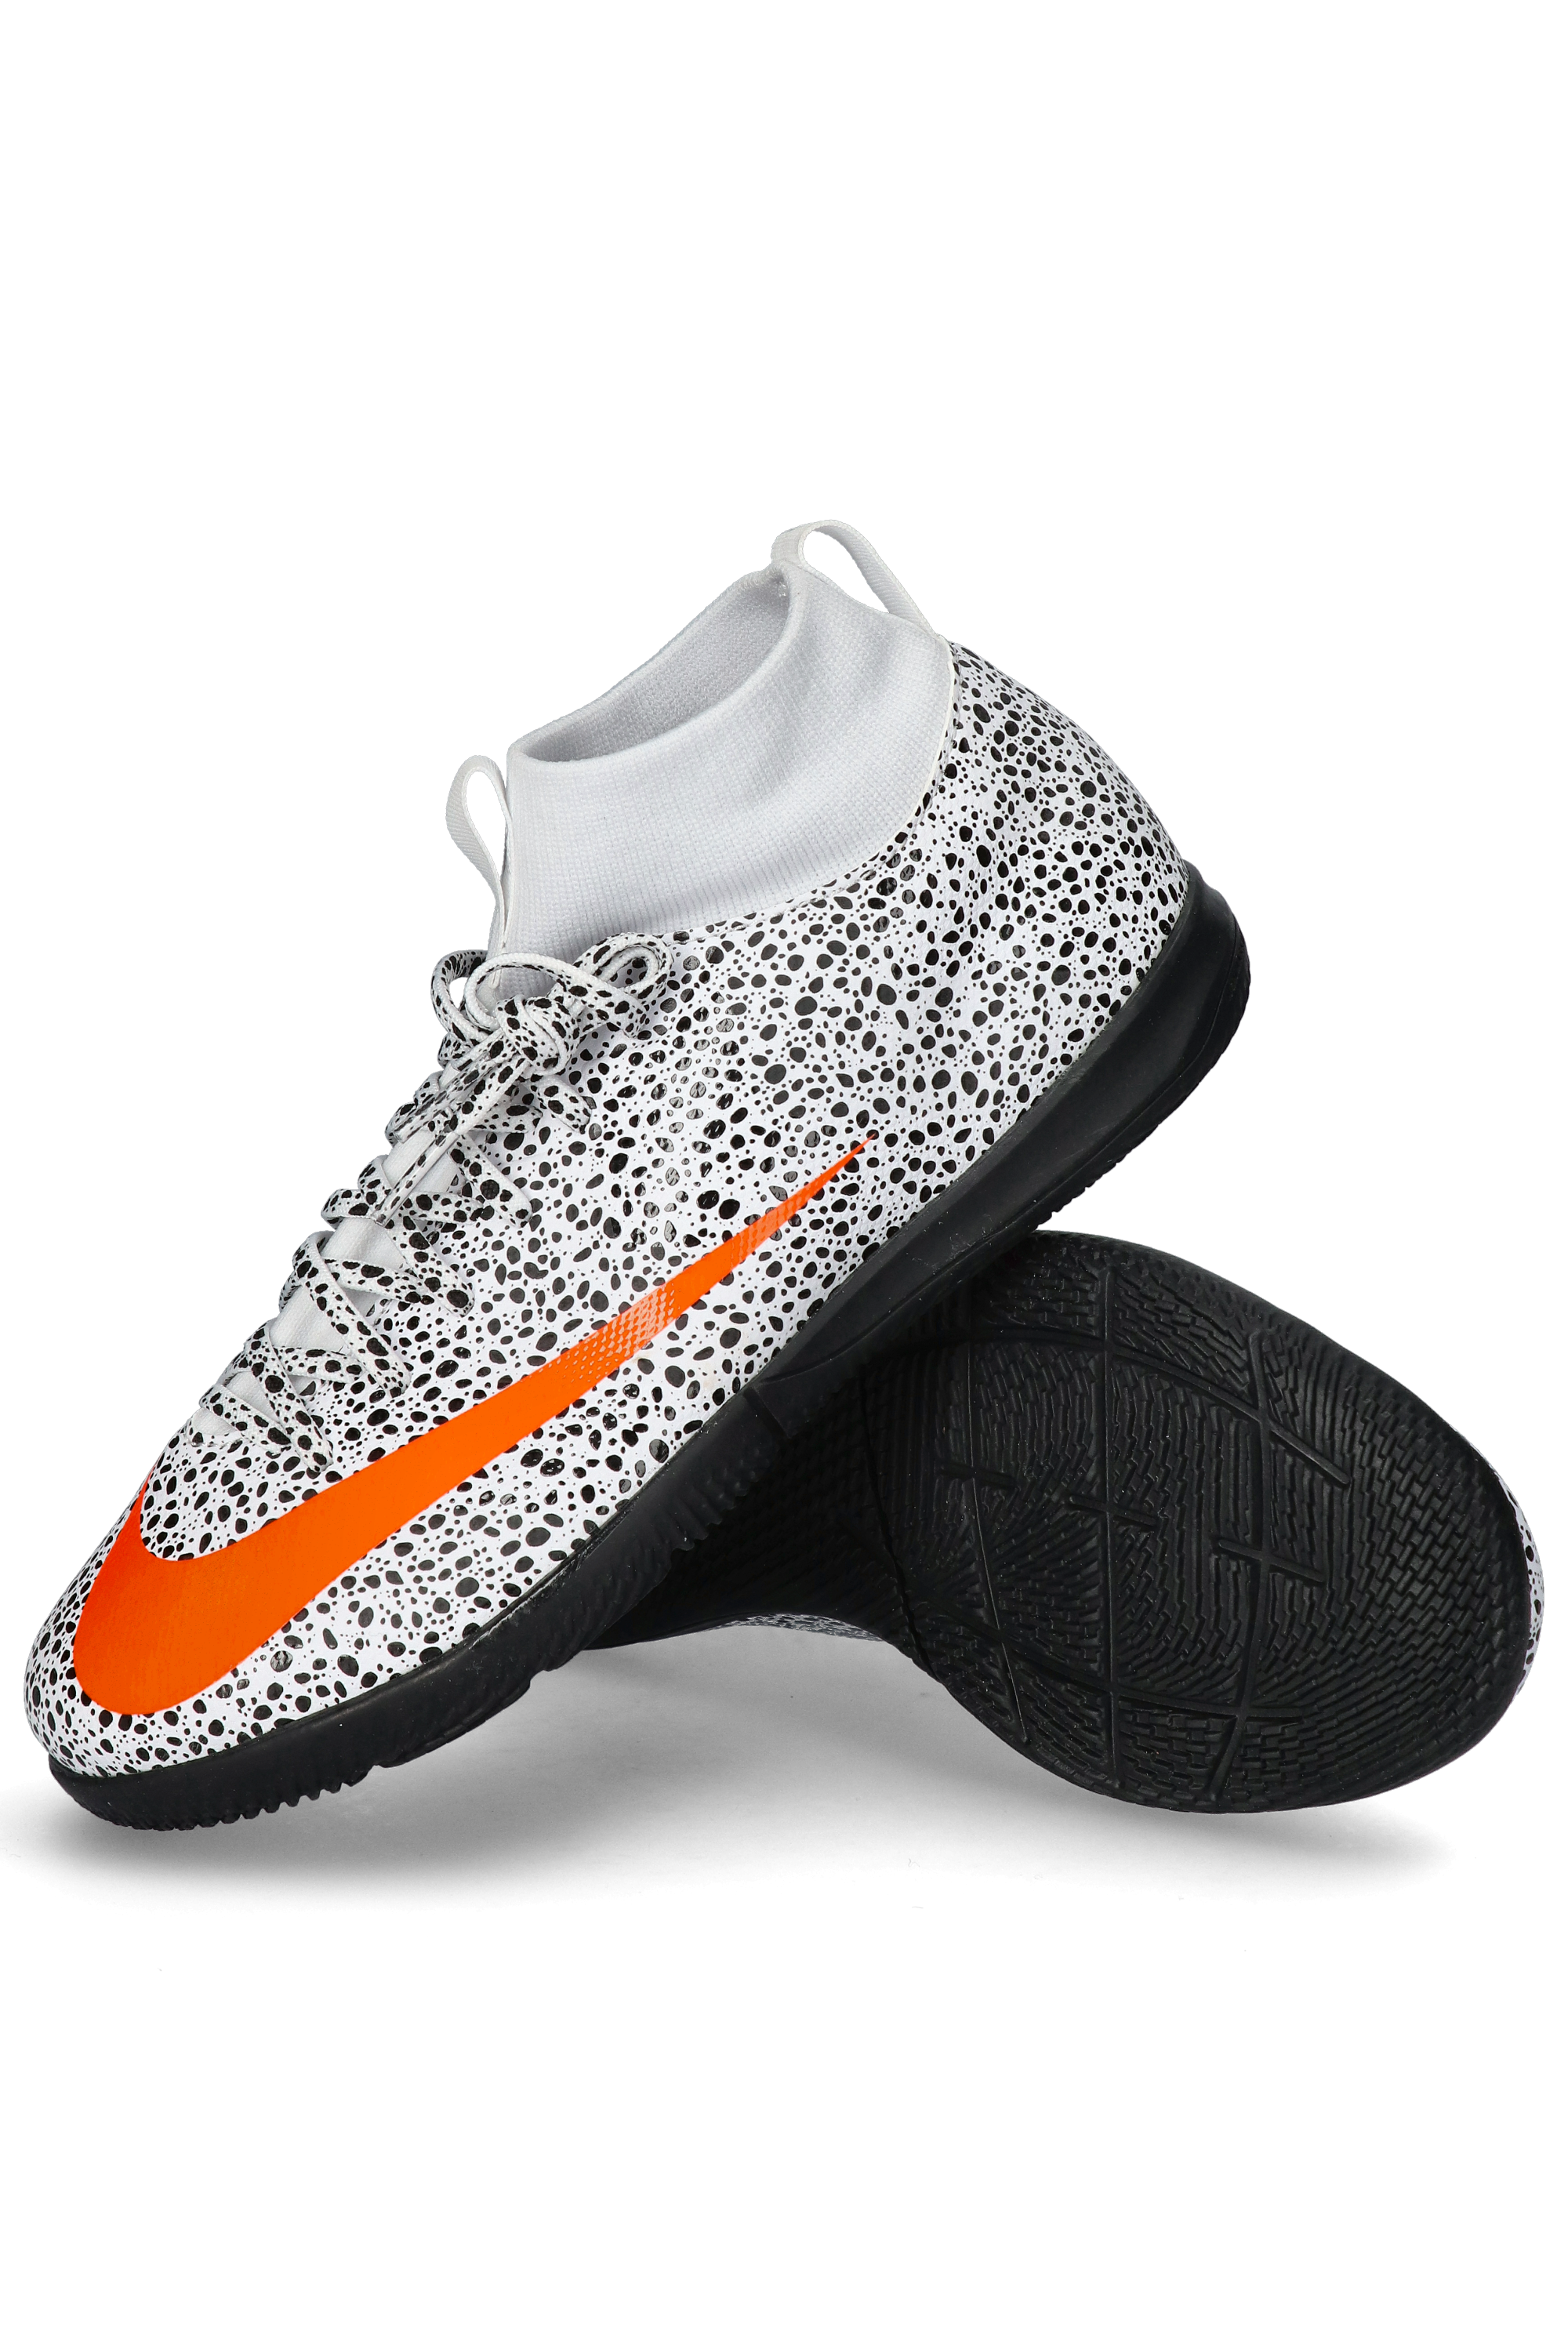 Mercurial Superfly 6 Academy Sg Pro Raised On Concrete Nike